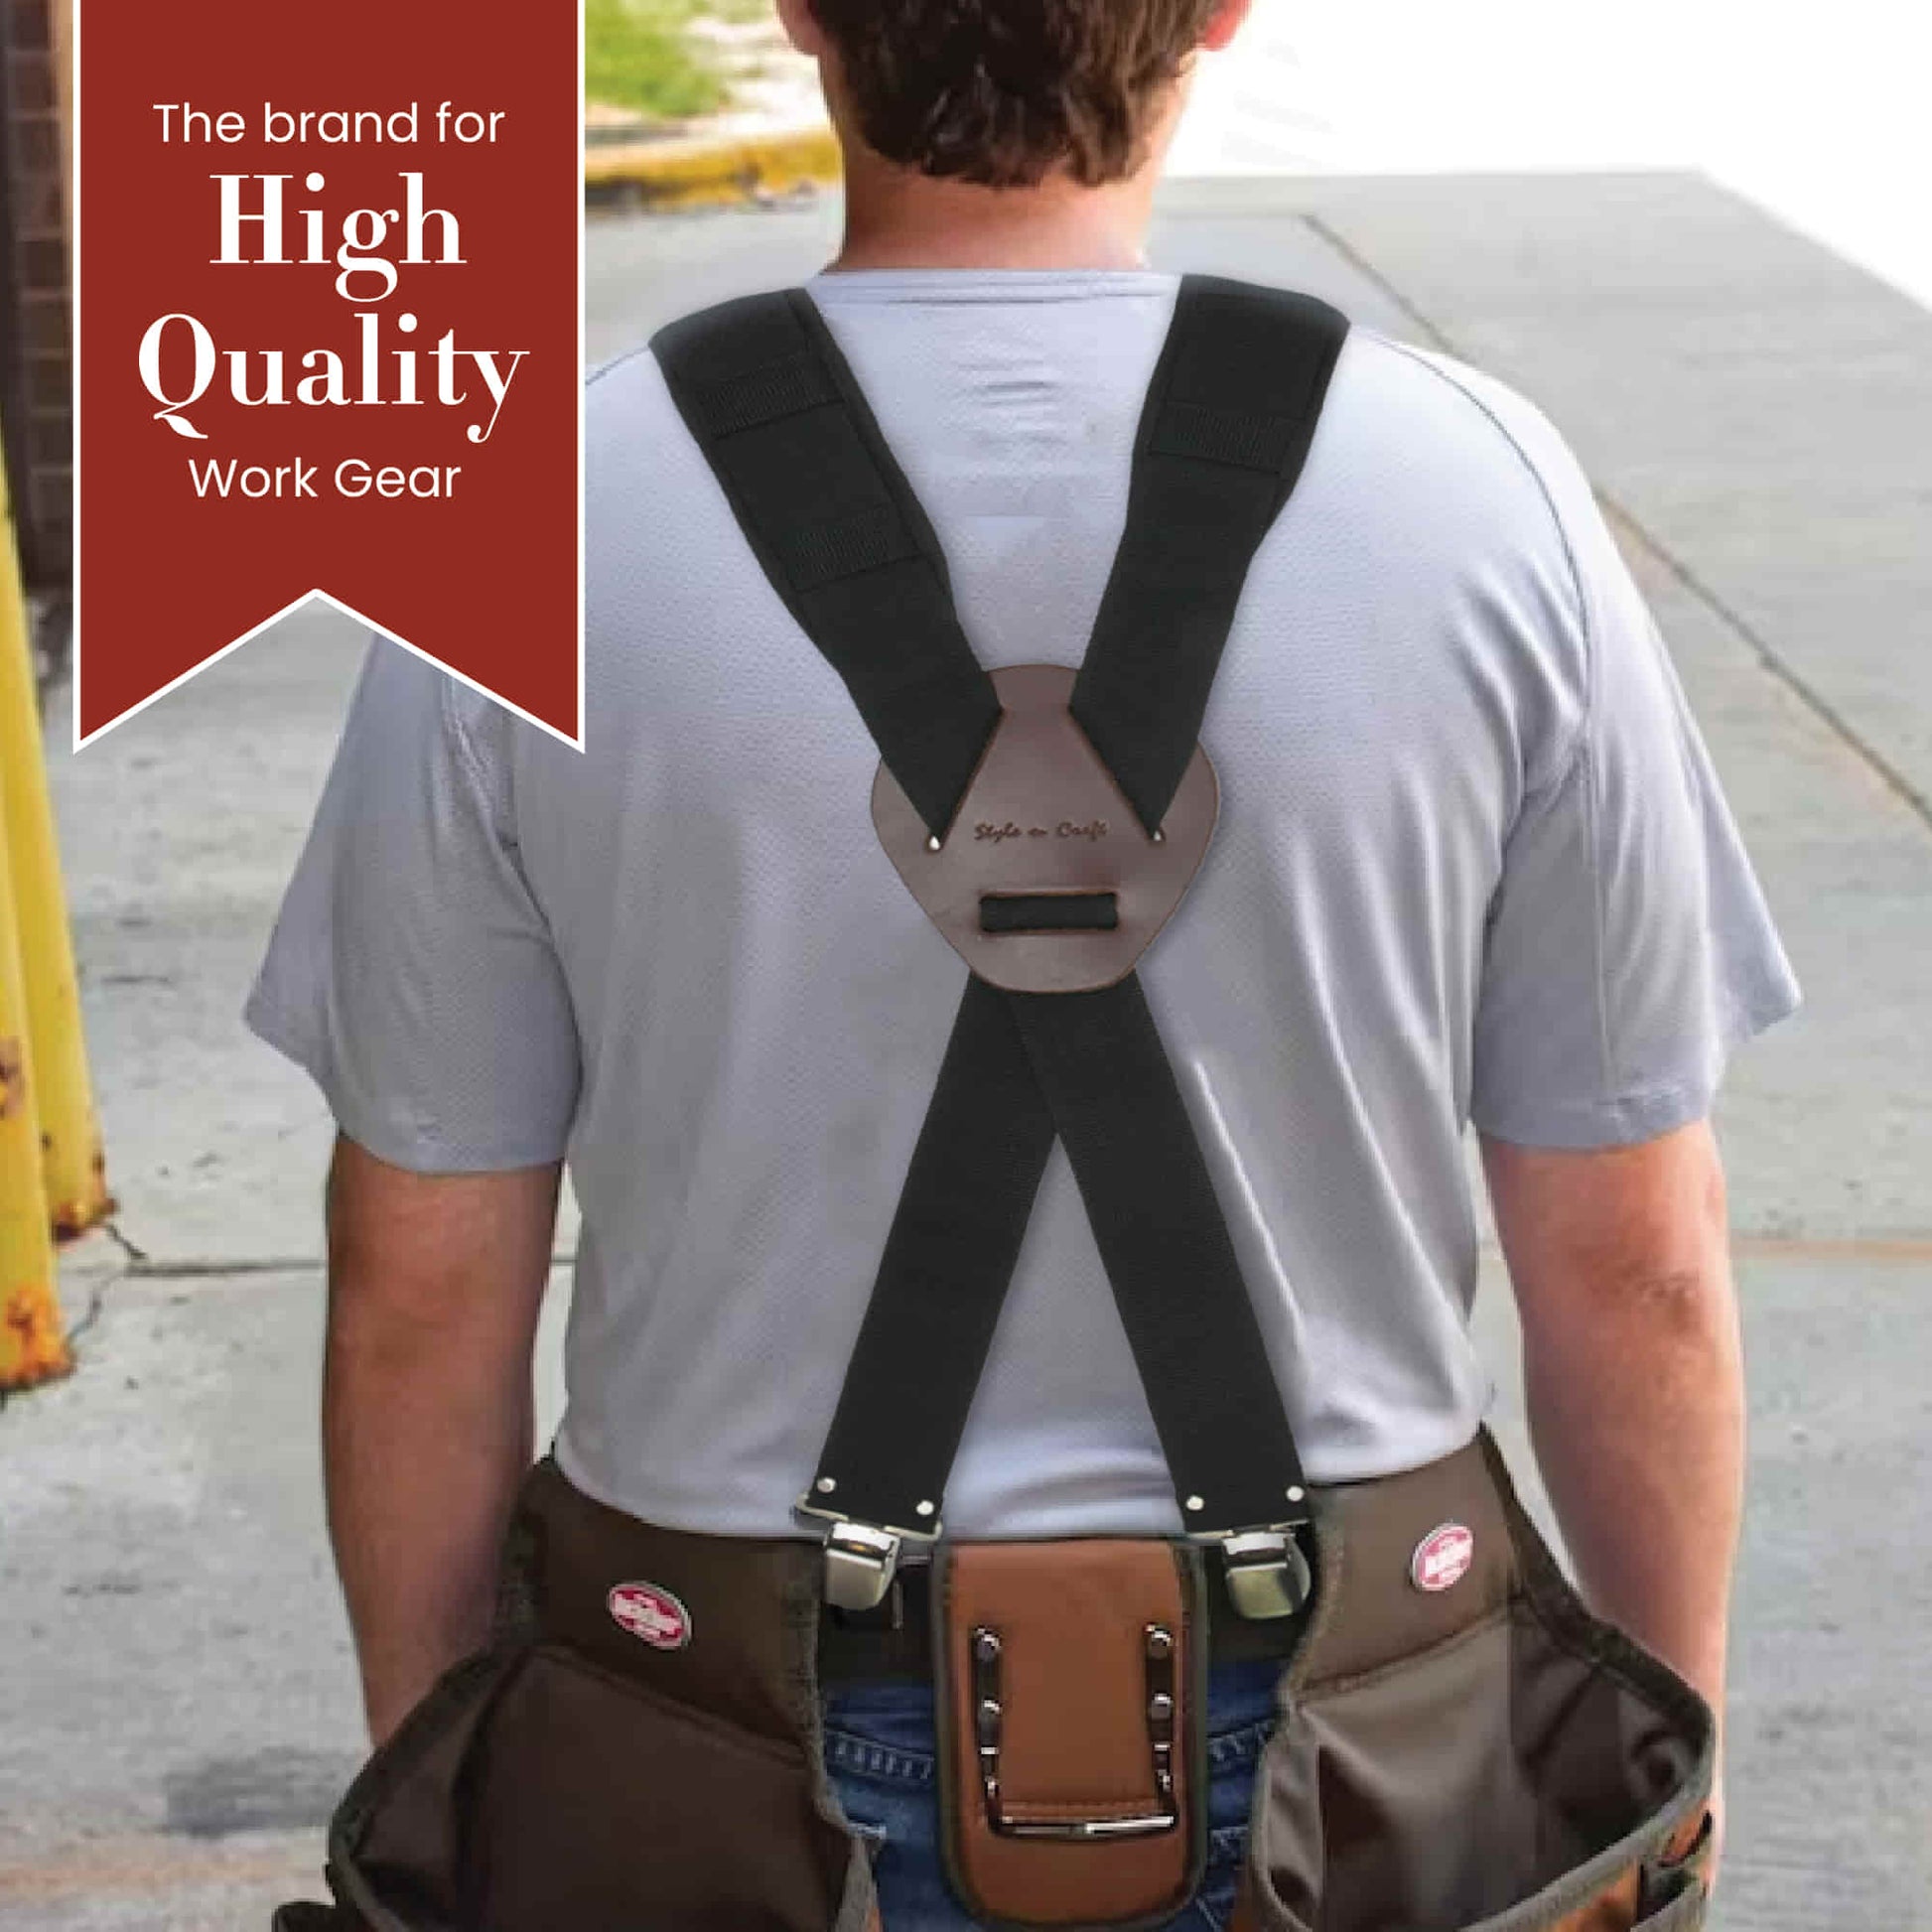 2 Inch Wide Padded Work Suspenders with Metal Clips | Style n Craft ...